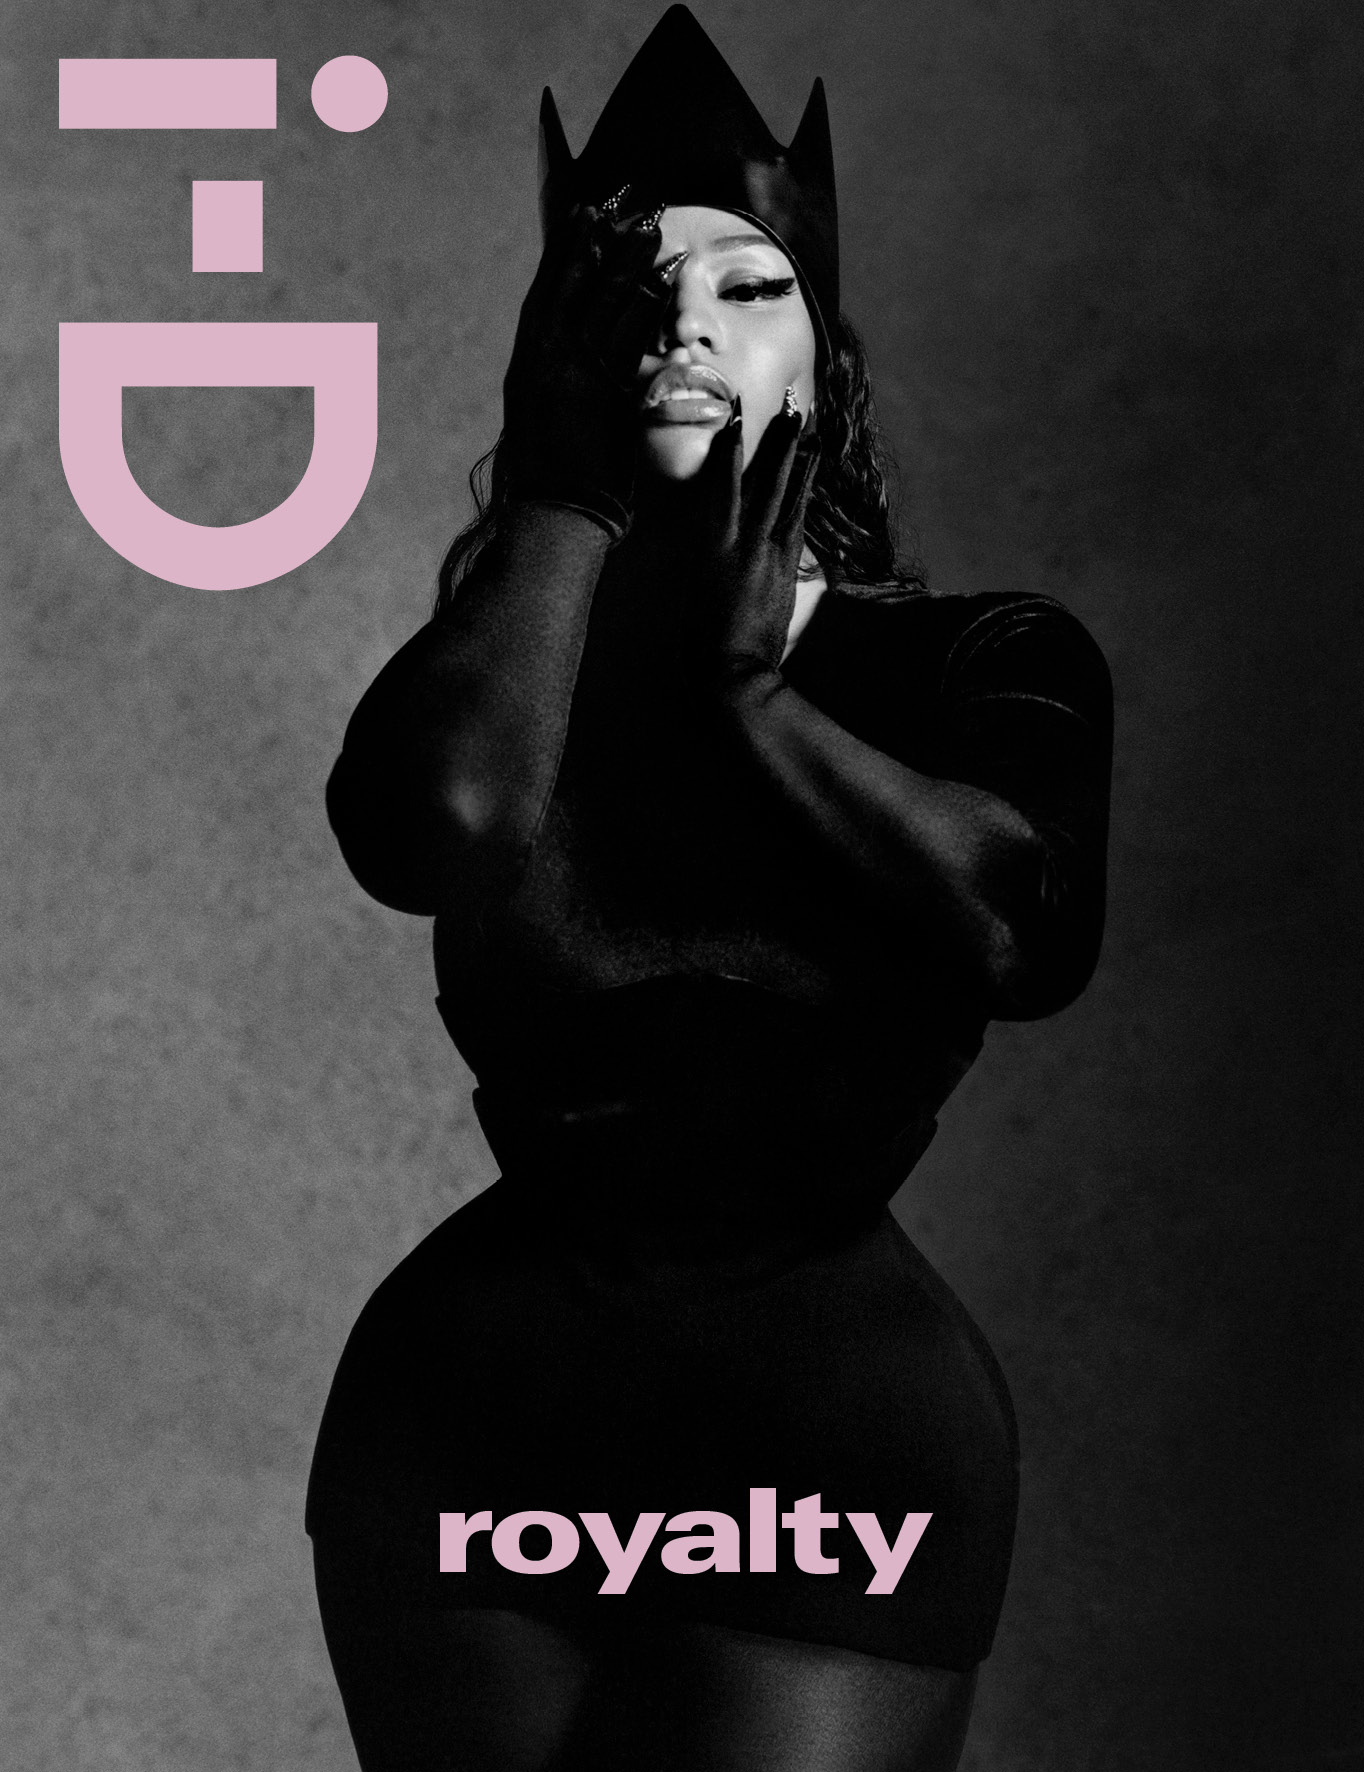 Nicki Minaj photographed by Luis Alberto Rodriguez on the cover of i-D’s The Royalty Issue, no. 370, Winter 2022 